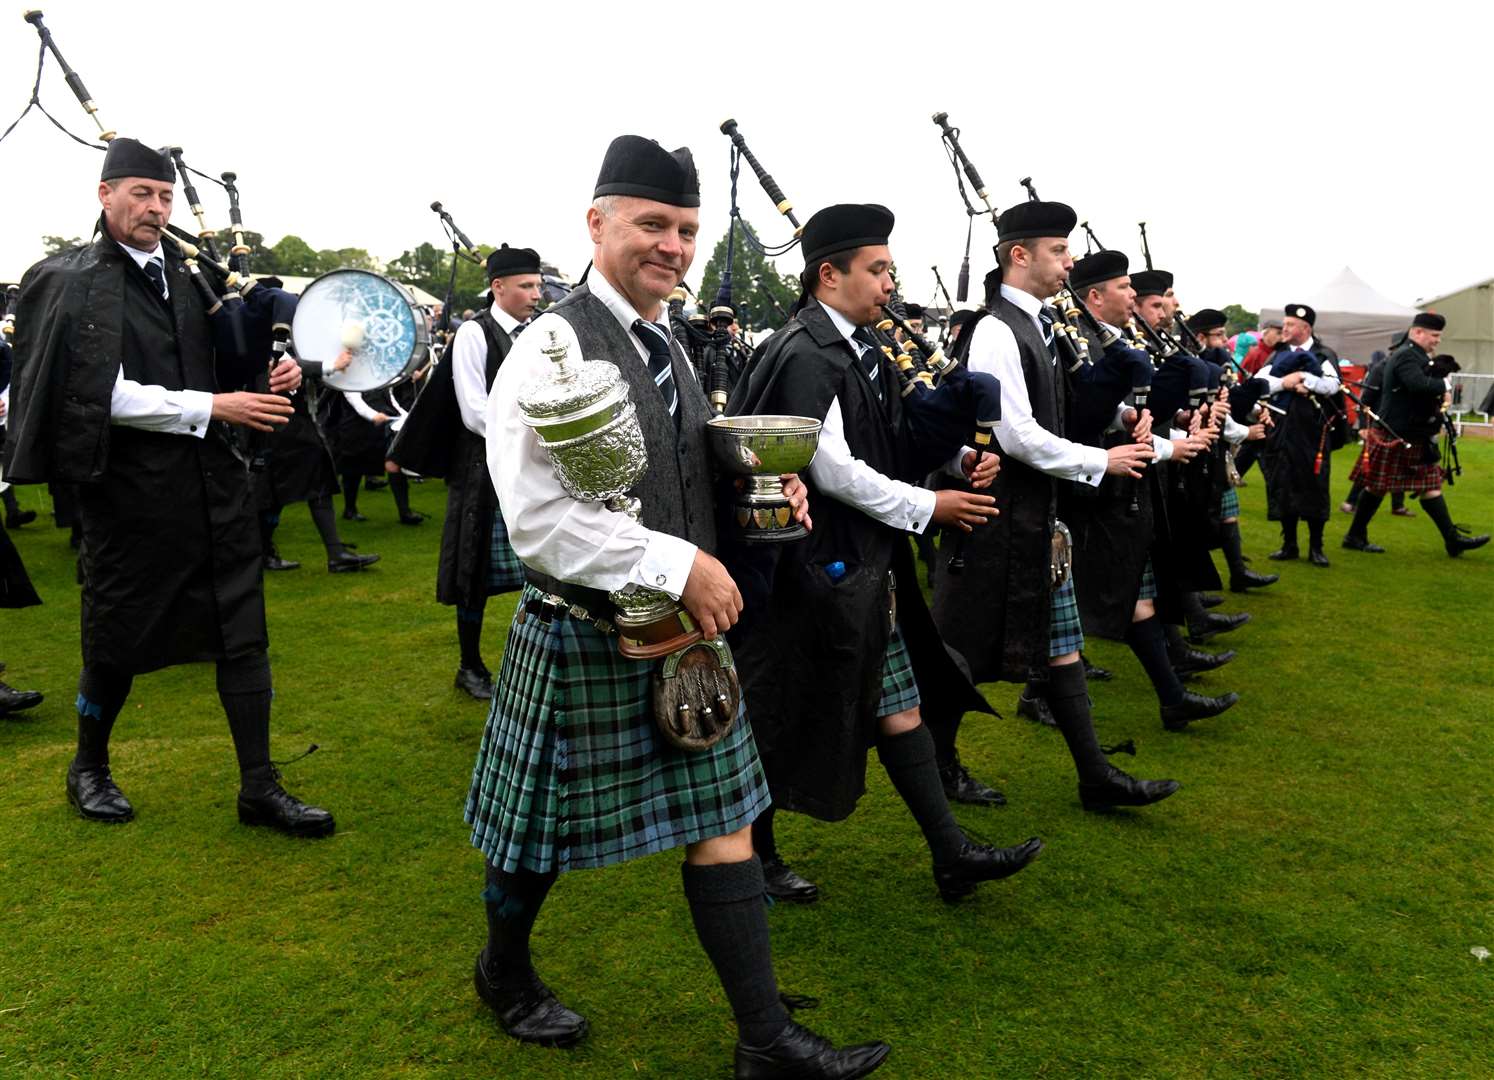 Pipe Major Stuart Liddle of Inveraray and District Pipe Band winners of the grade 1 trophy 2019 as they leave the arena. Picture: Alasdair Allen